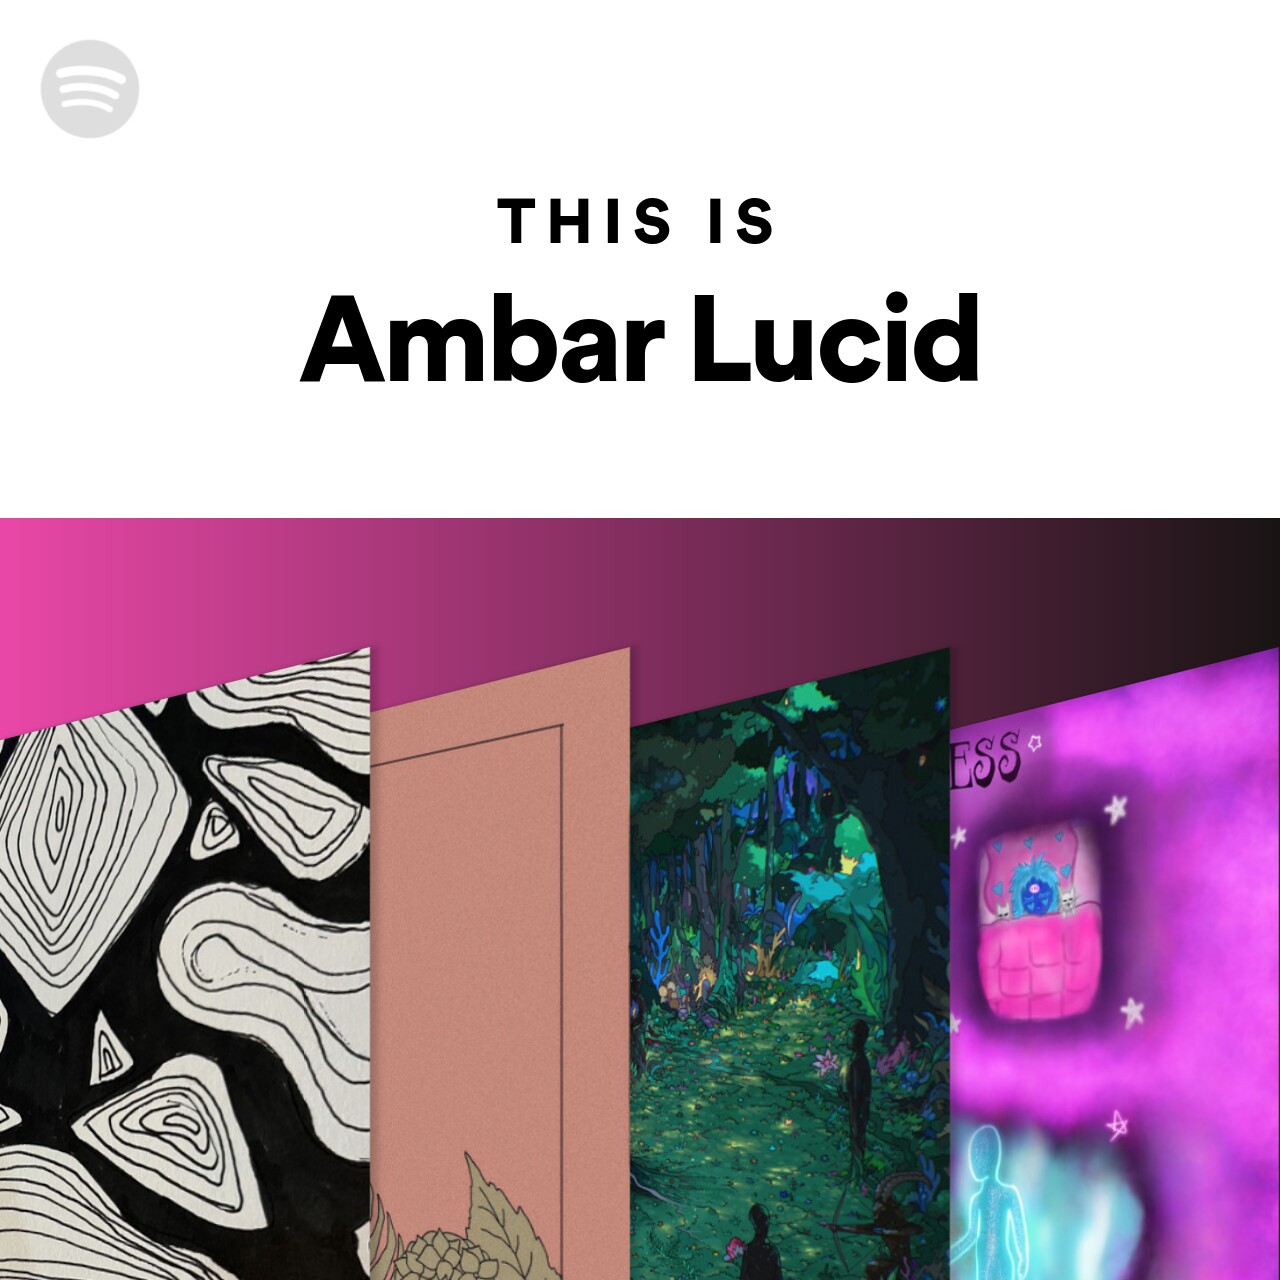 This Is Ambar Lucid